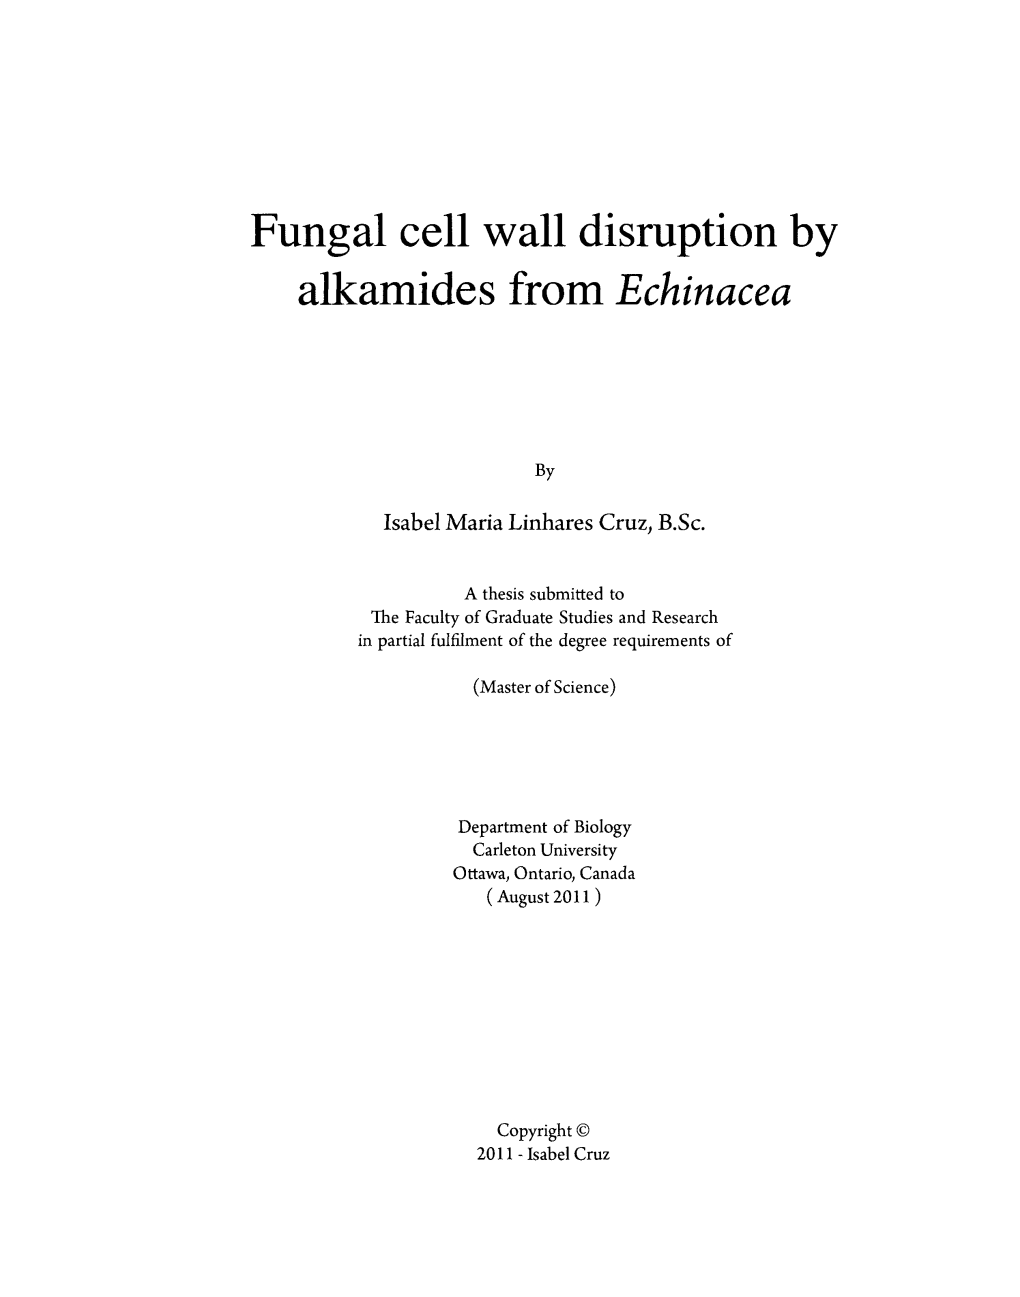 Fungal Cell Wall Disruption by Alkamides from Echinacea